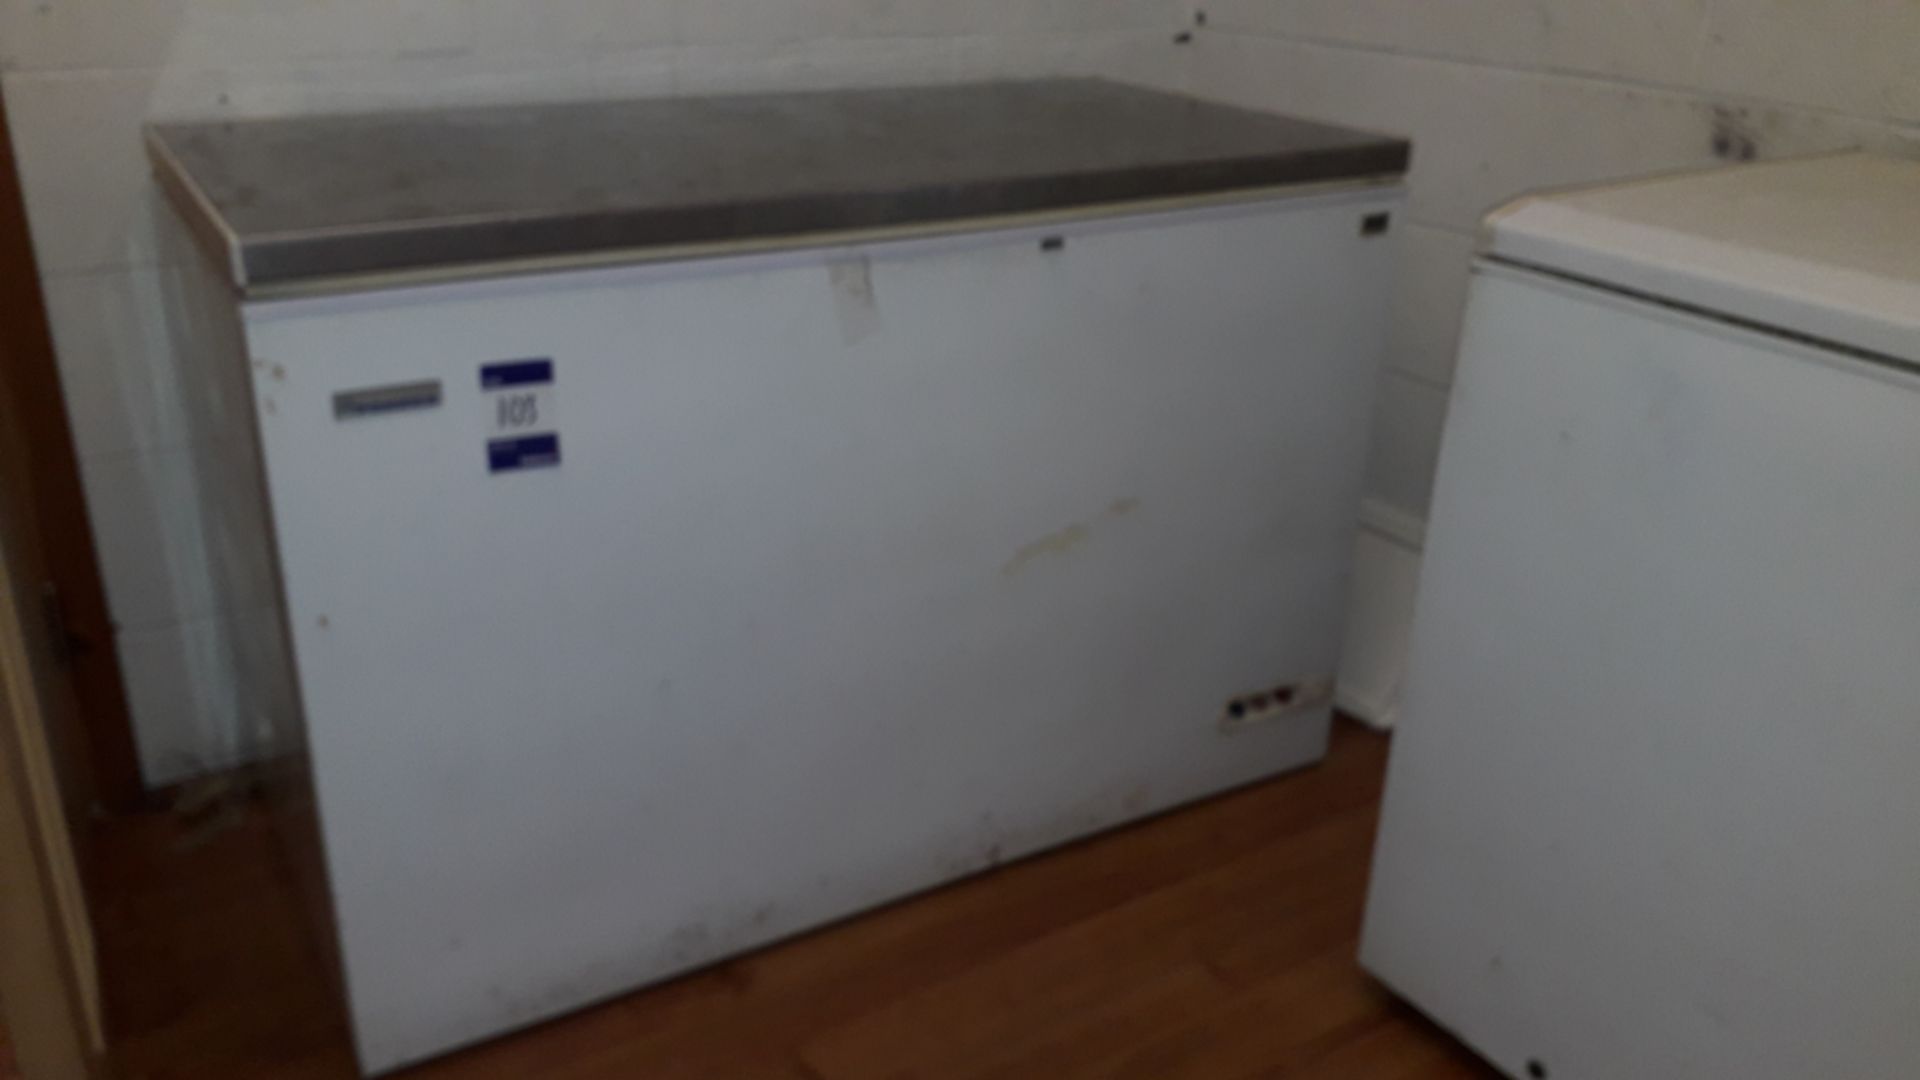 Elcold EL45SS Stainless Steel Lid 1300mm Chest Freezer Serial Number 03090609. Located at Fresco's - Image 2 of 4